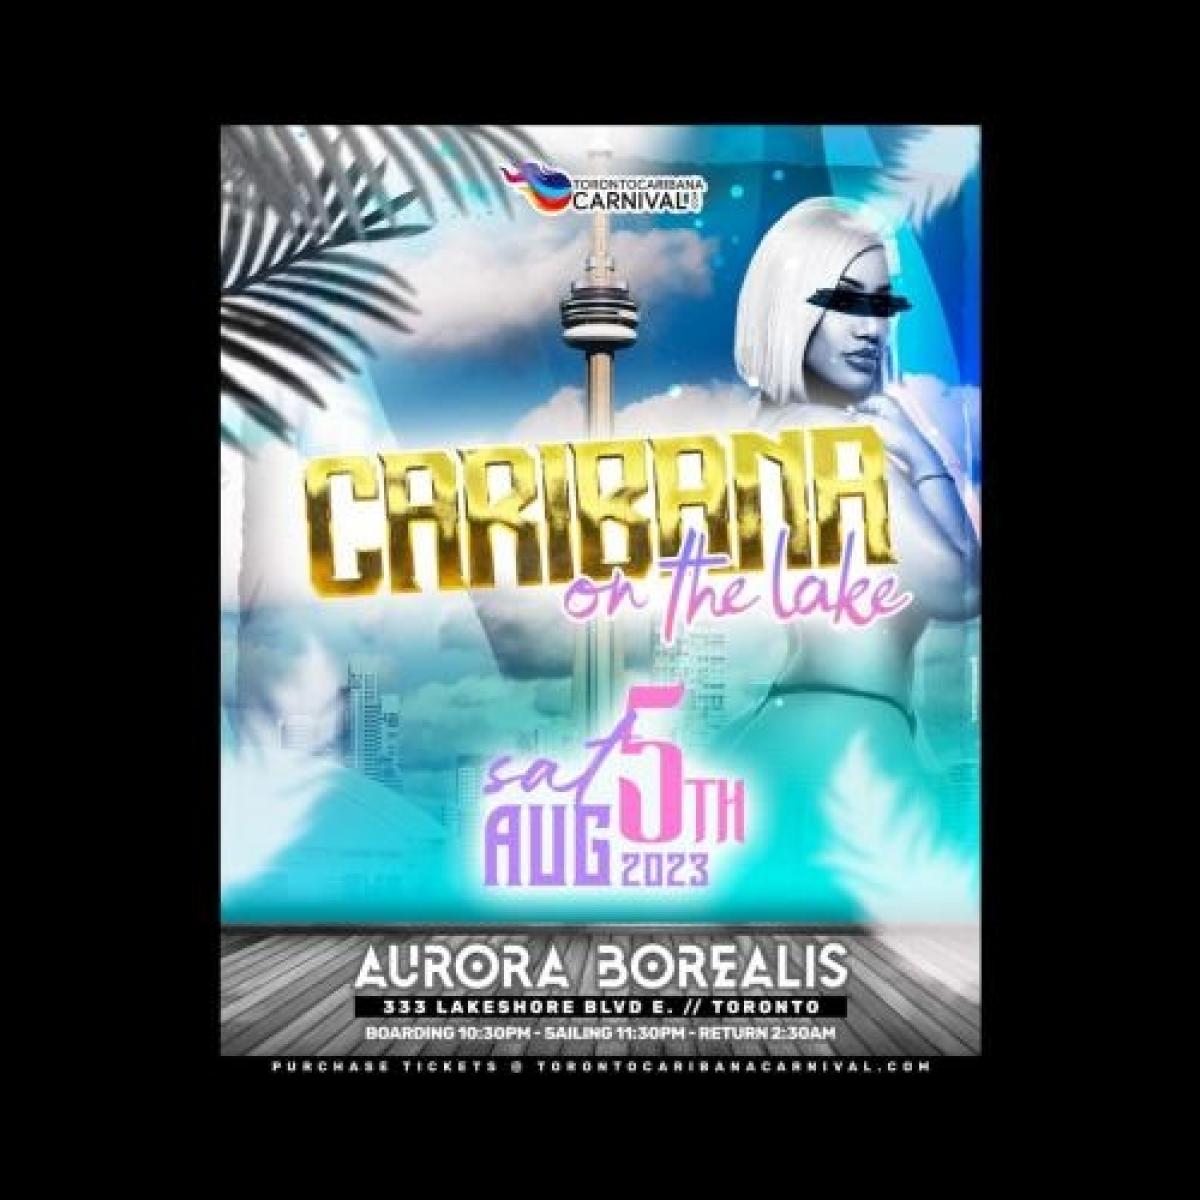 Caribana On The Lake Boat Cruise flyer or graphic.